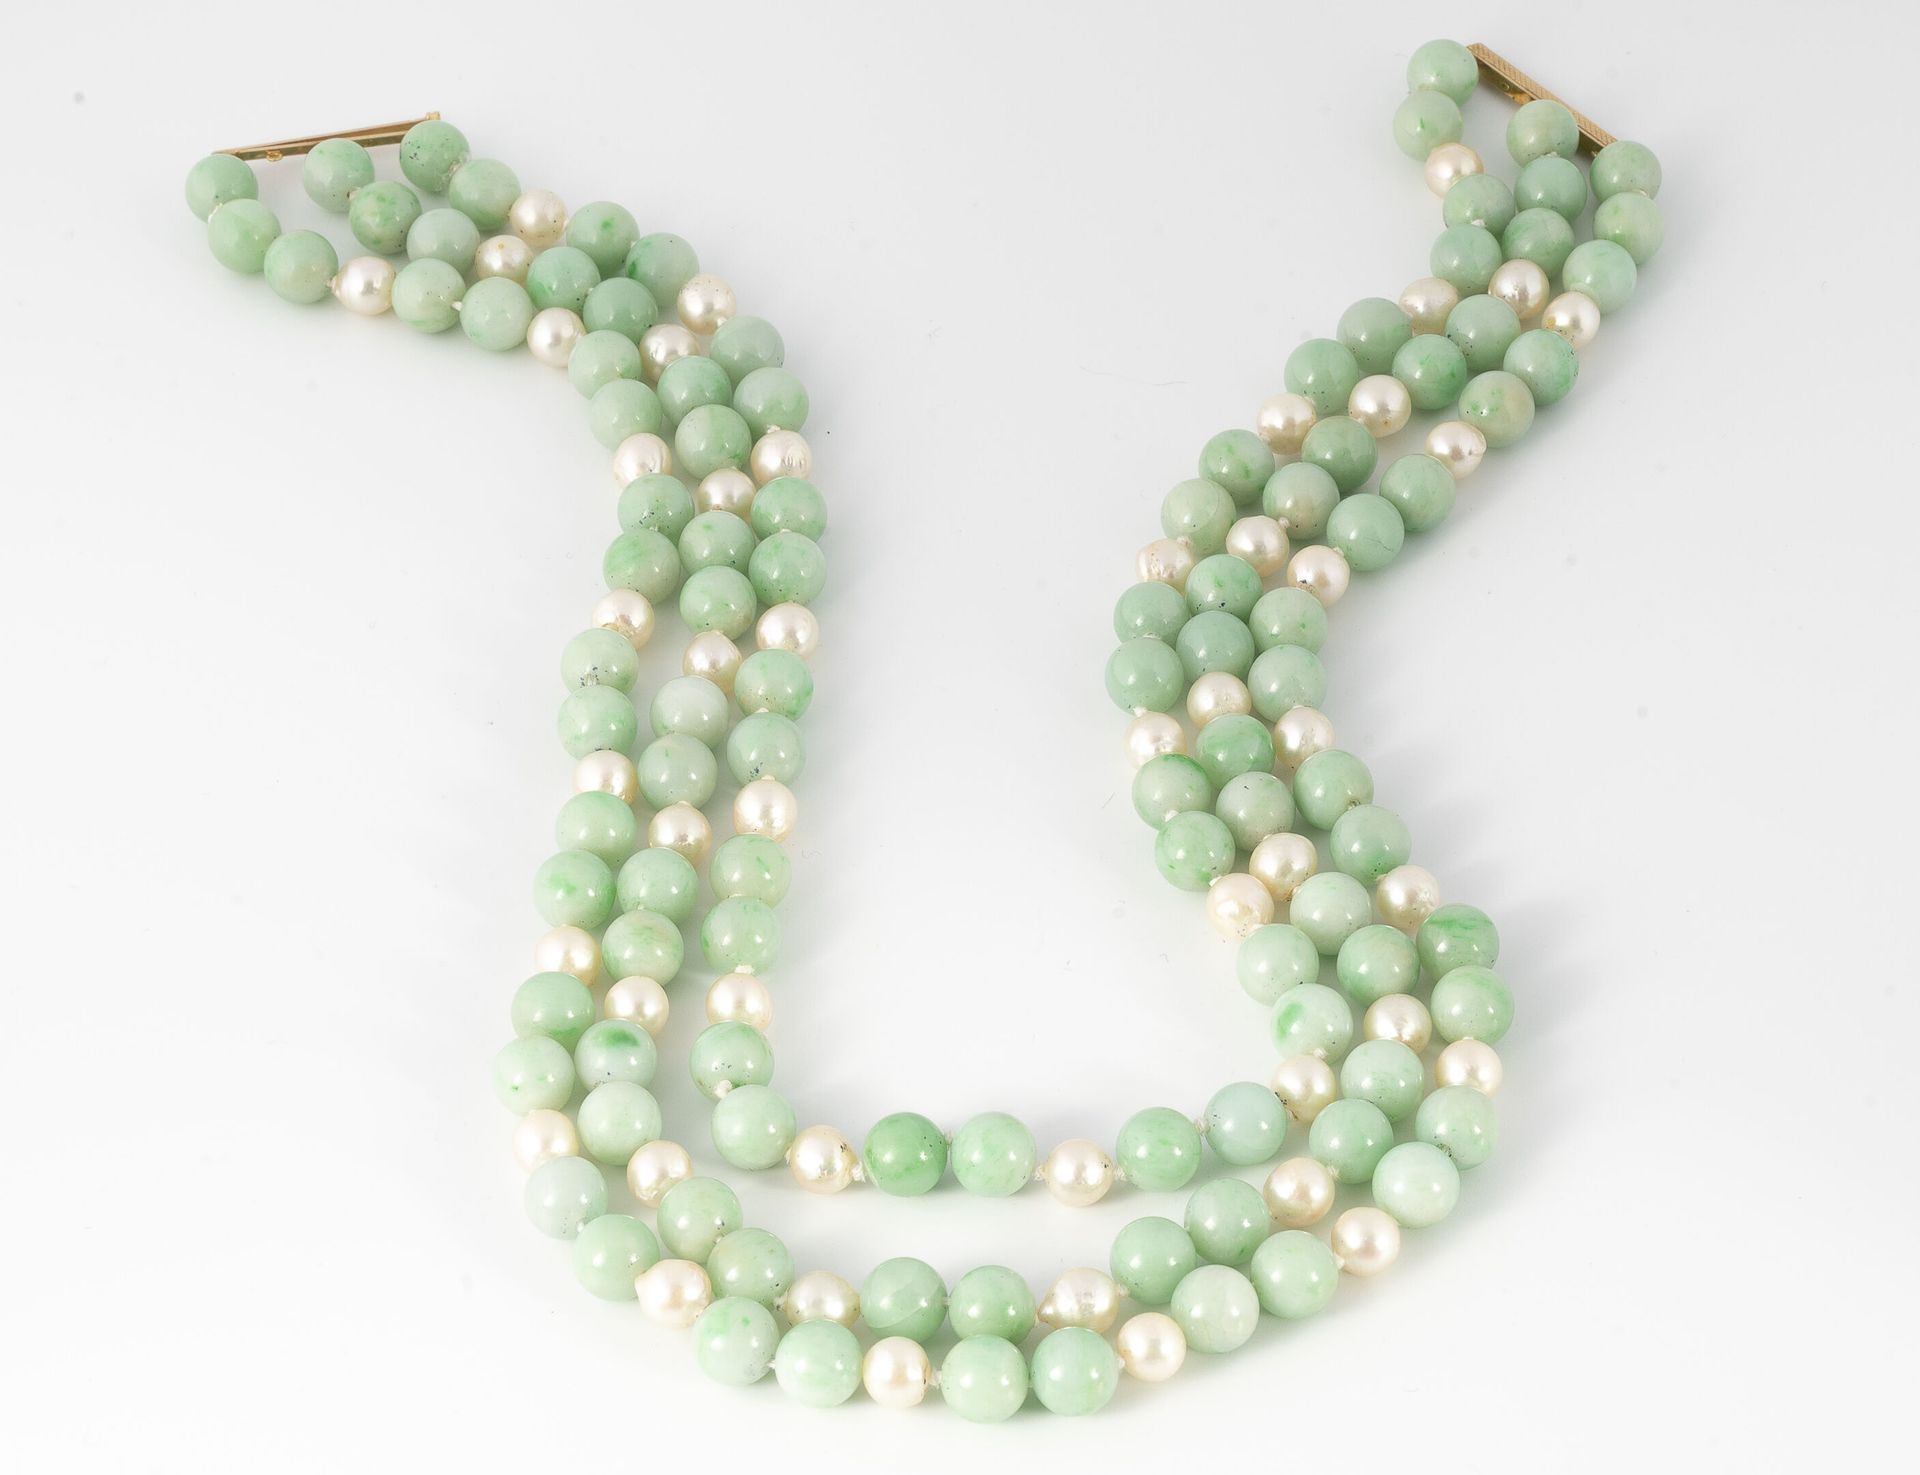 Null Necklace with three rows of jadeite beads alternated with cultured pearls.
&hellip;